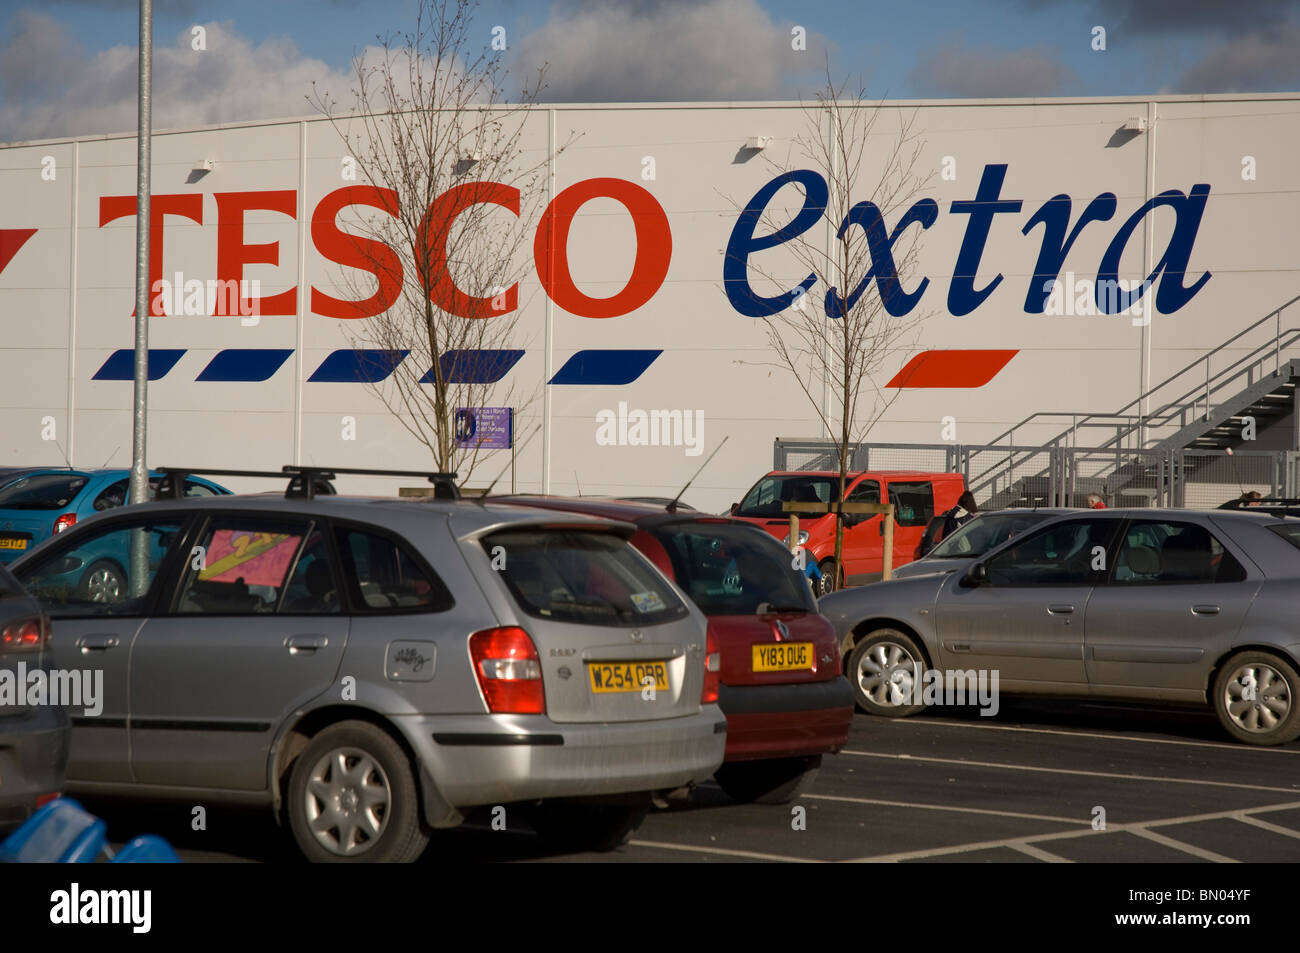 Tesco Extra superstore, Haverfordwest, Pembrokeshire, Wales, UK, Europe Stock Photo